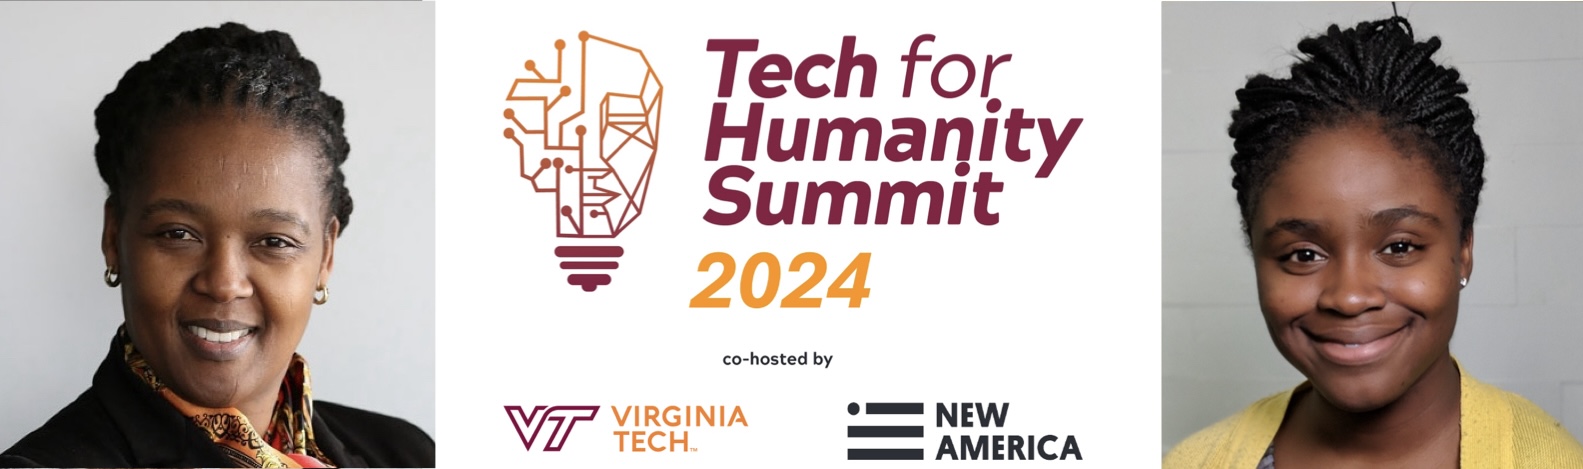 2024 Tech for Humanity Summit